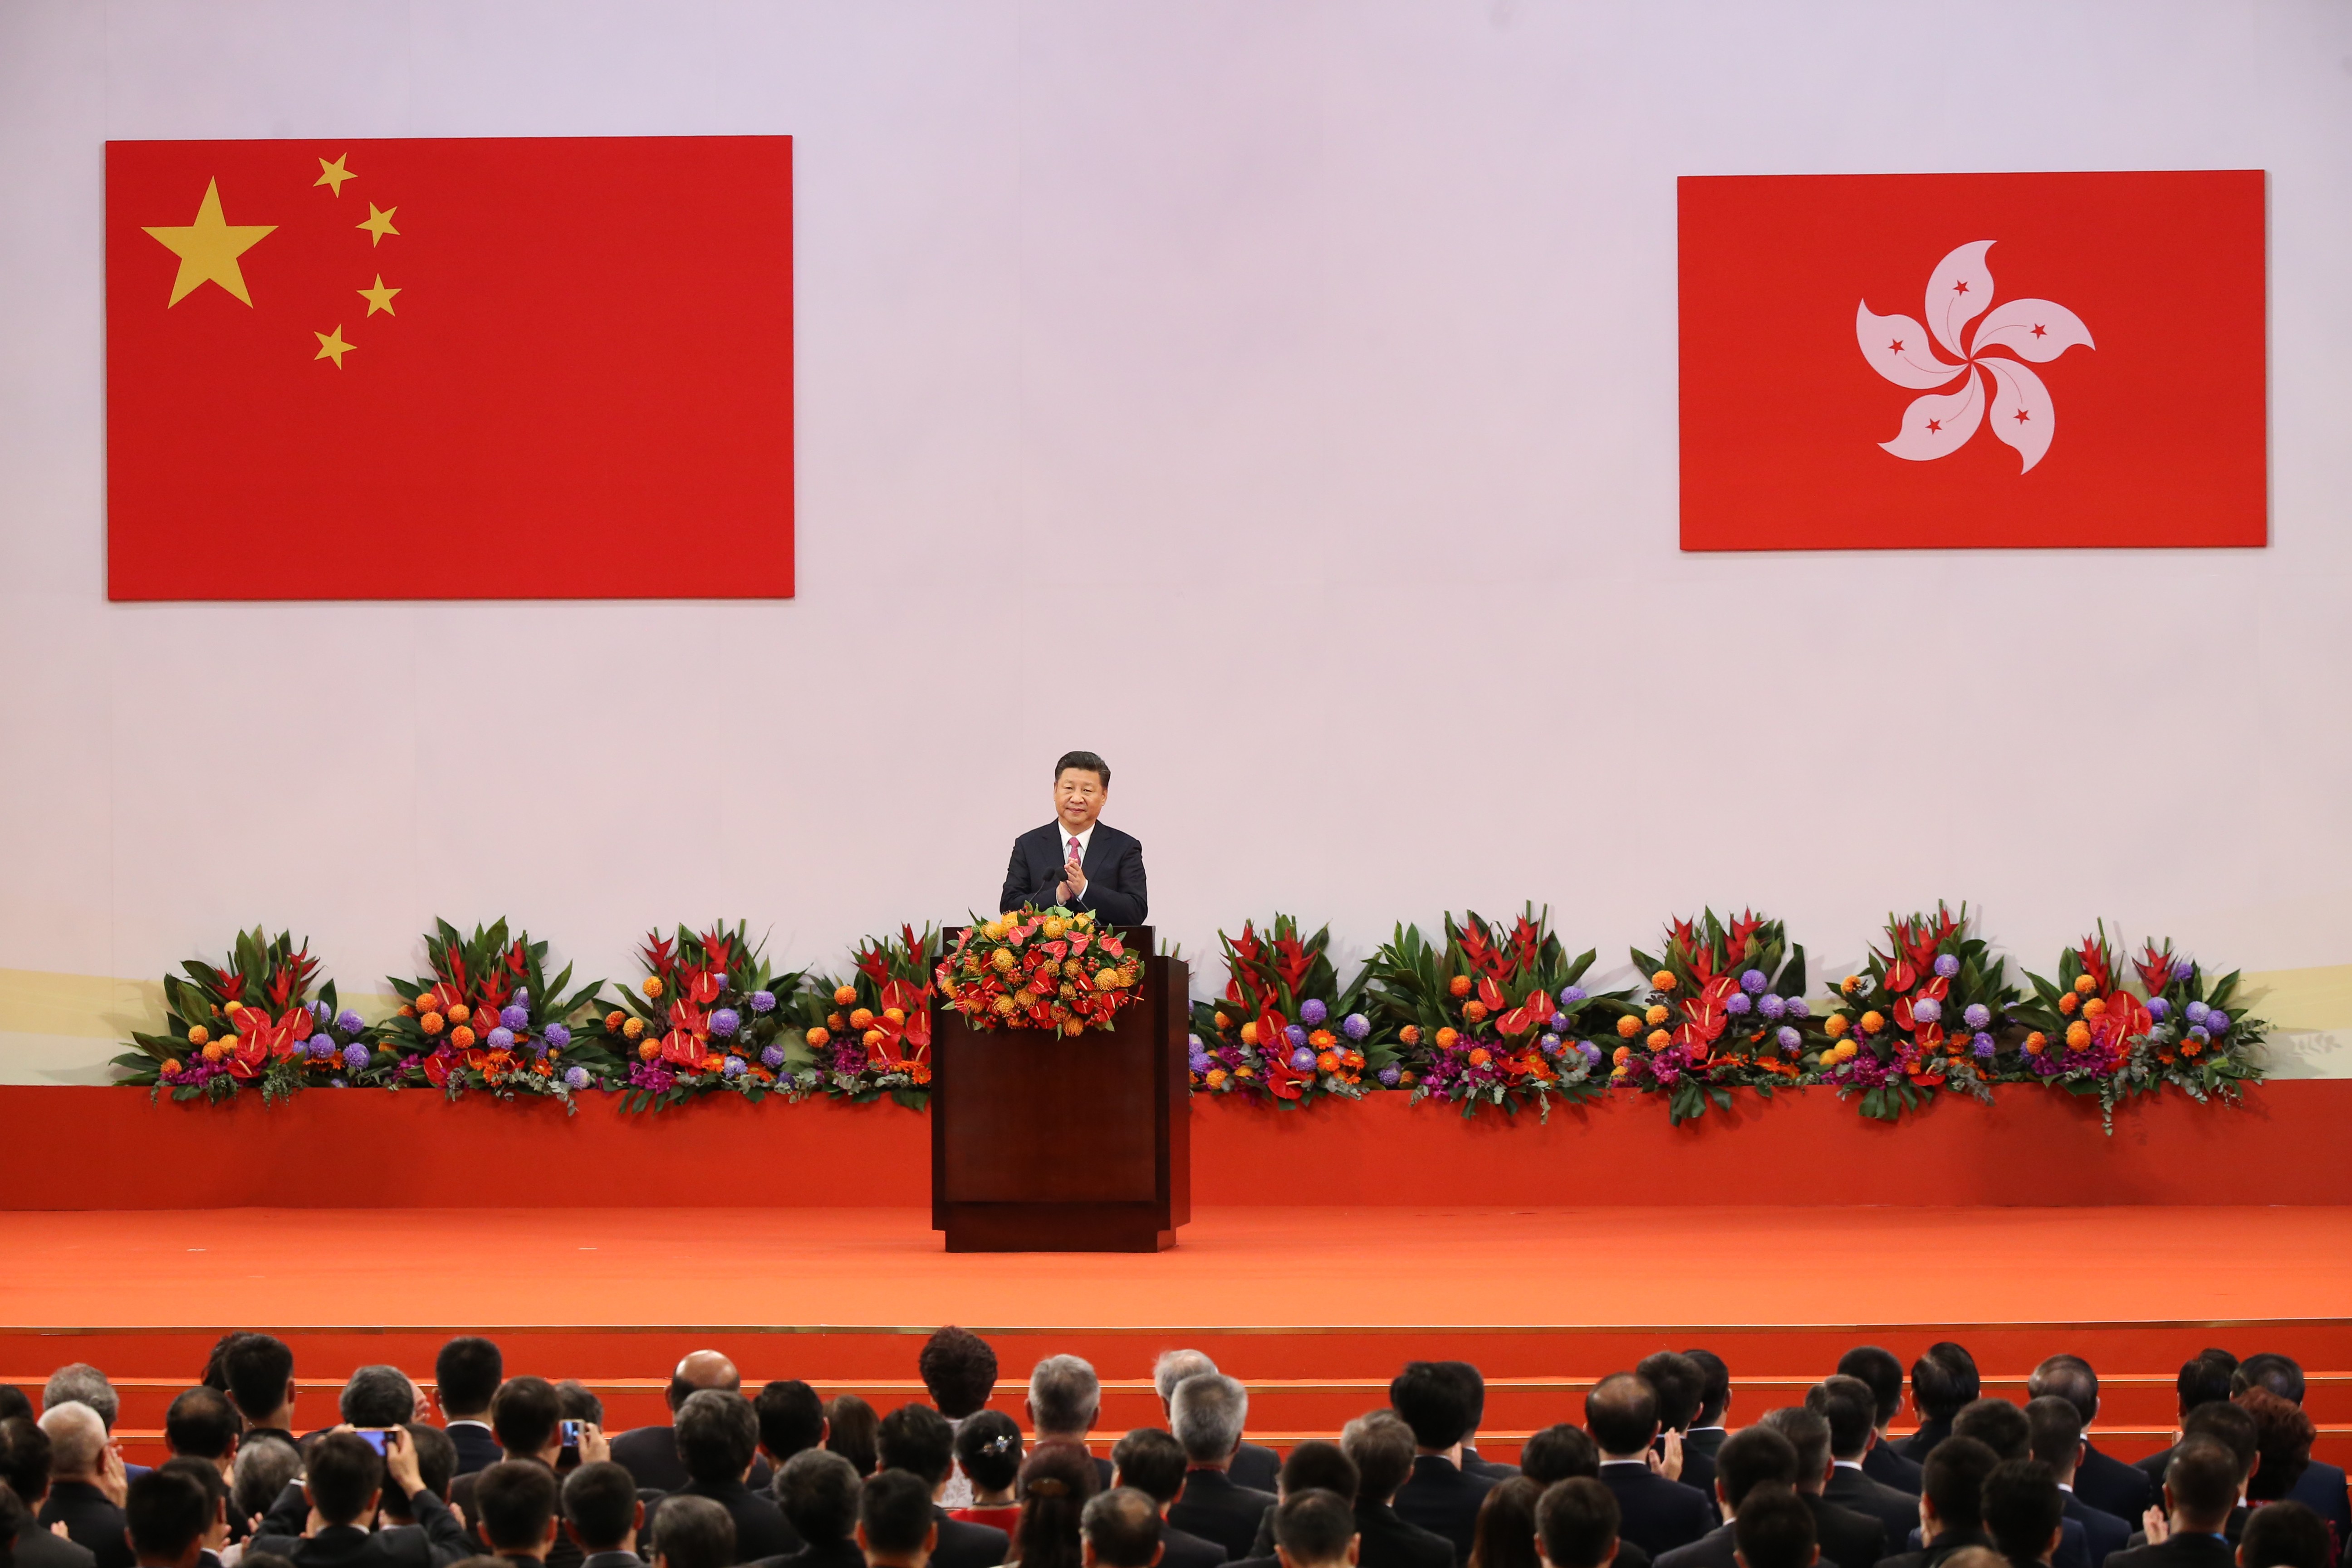 President Xi Jinping speaks following Carrie Lam’s swearing-in ceremony. Photo: Sam Tsang